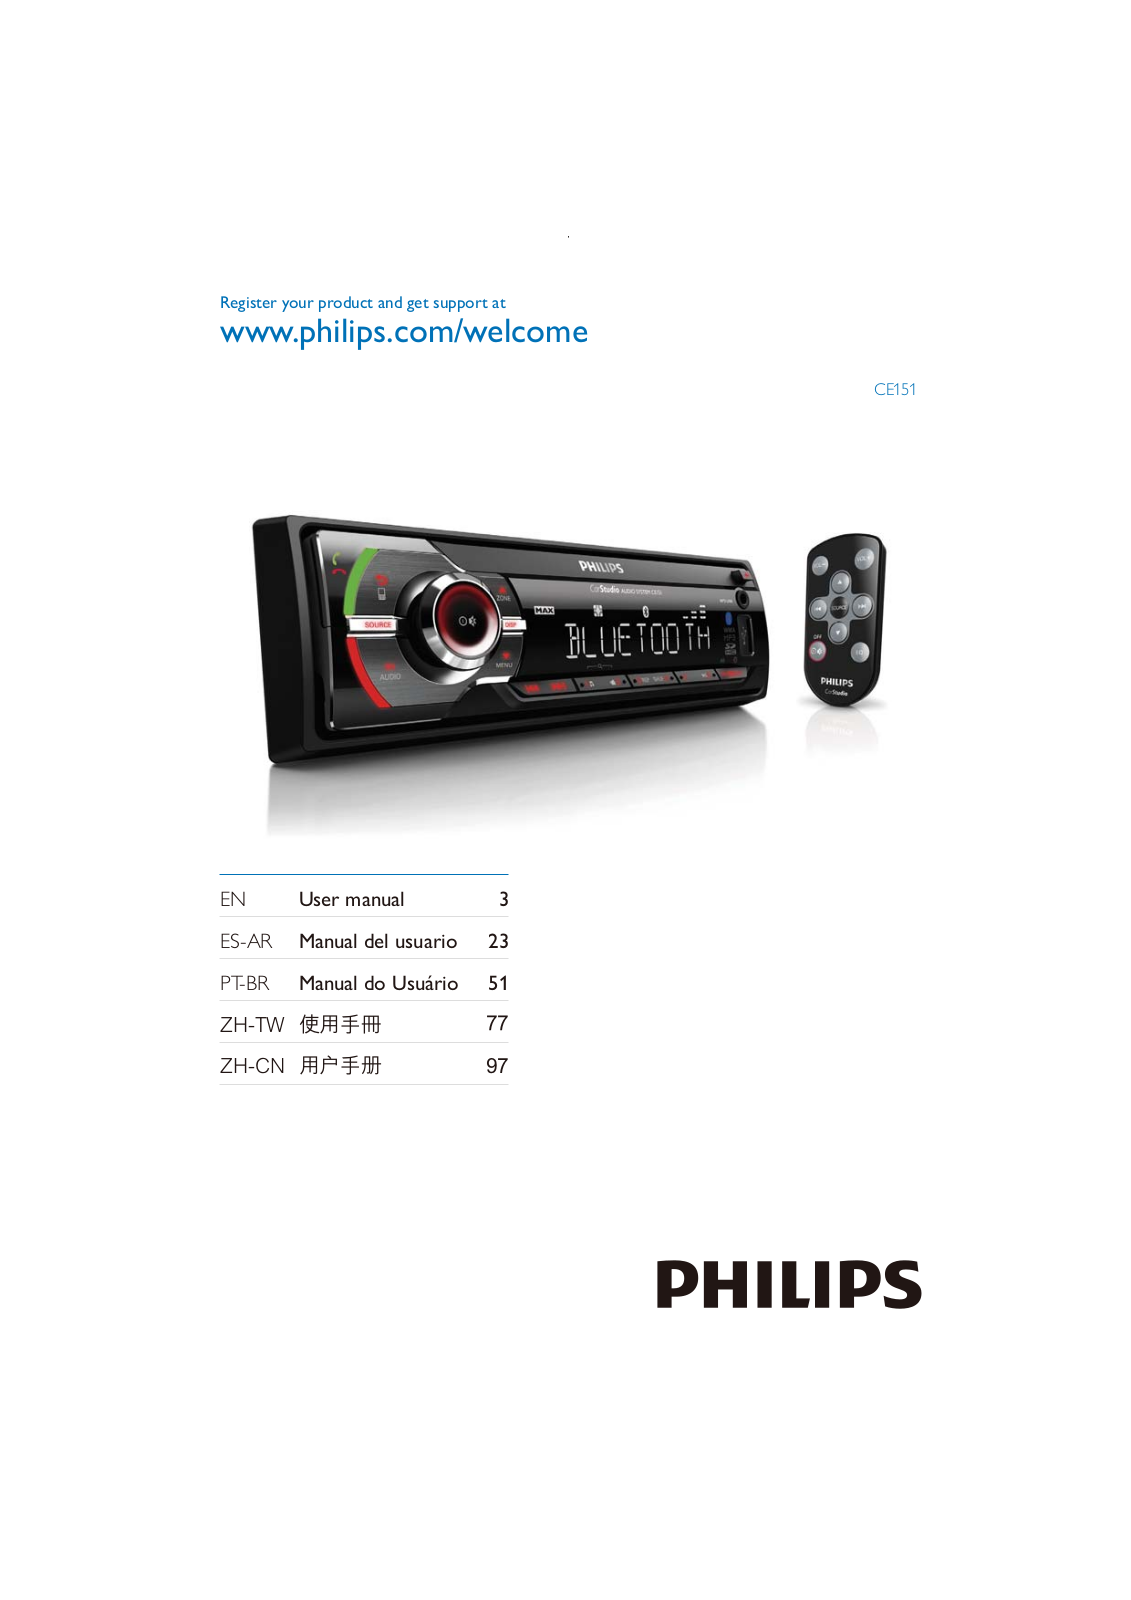 Philips SDHC CE151 User Manual